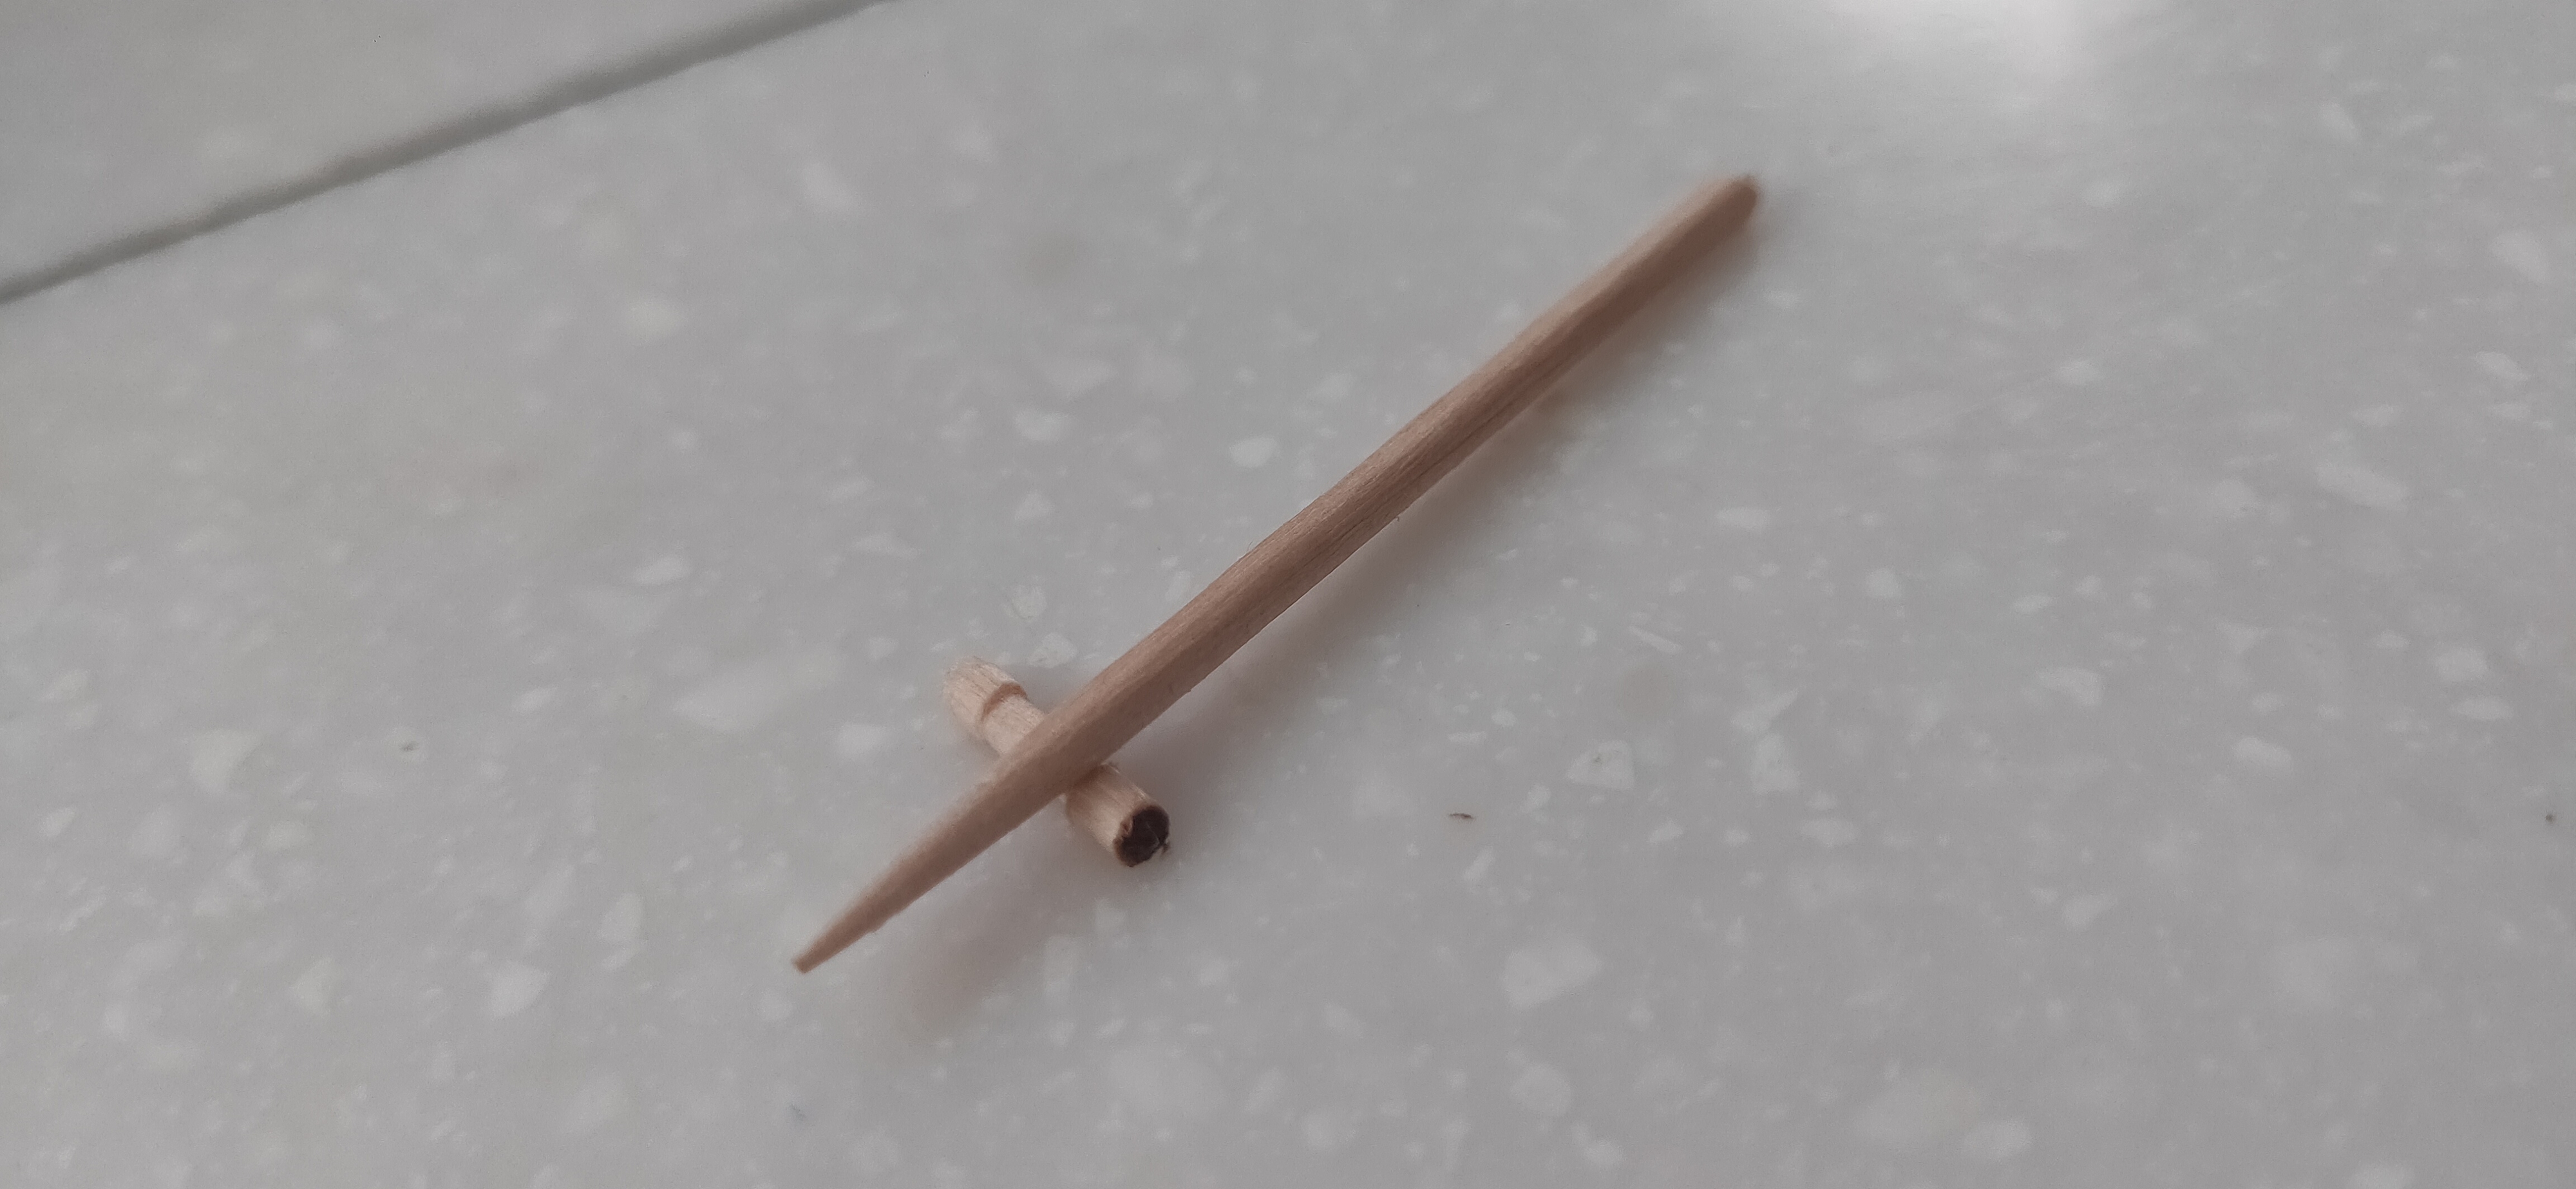 A single pencil with a broken tip lying on a flat surface